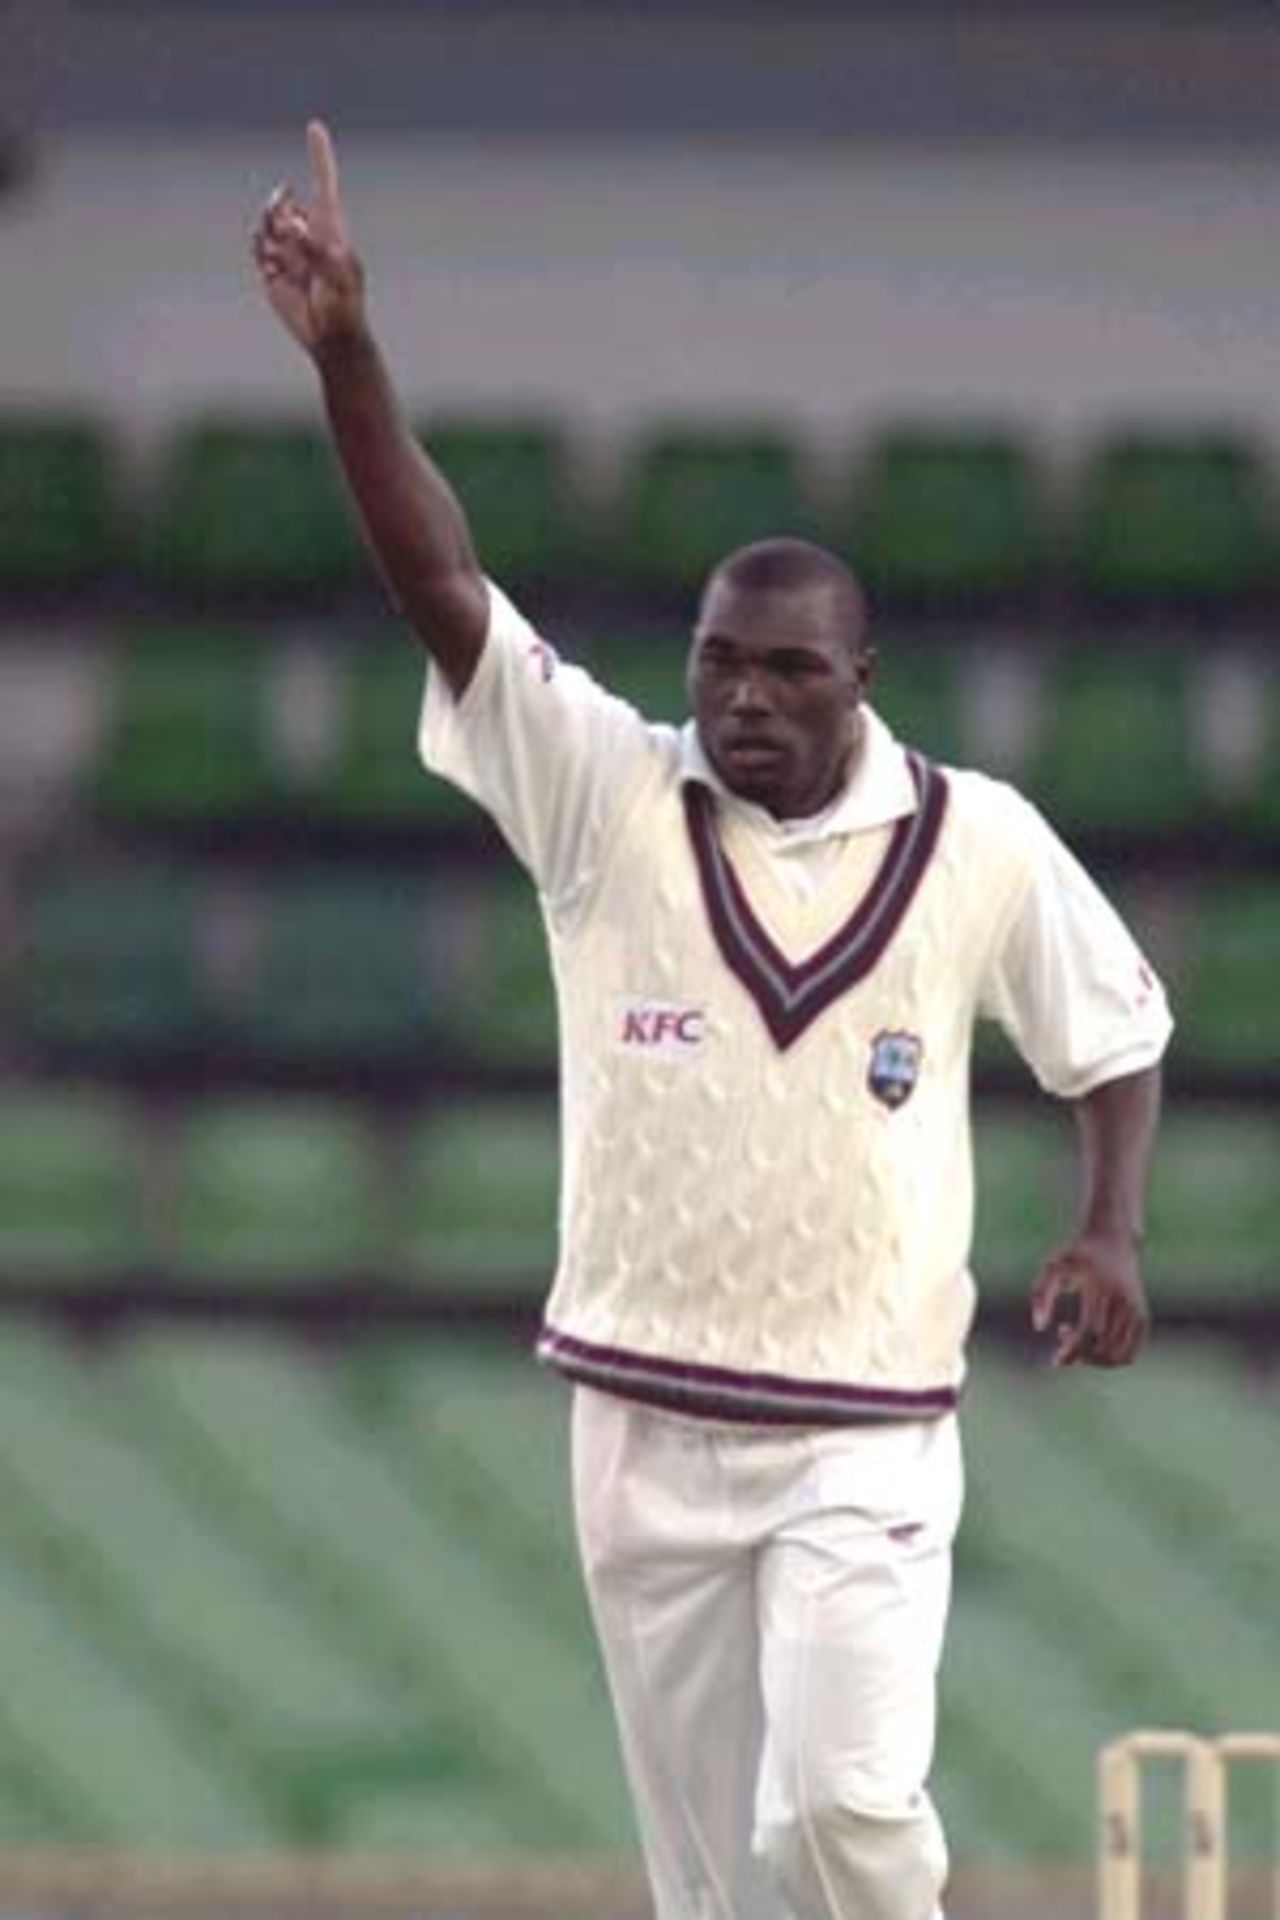 09 Nov 2000: Marlon Black for the West Indies gets the wicket of Mike Hussey for Western Australia in the match between the Western Warriors and the West Indies at the WACA ground in Perth, Australia.